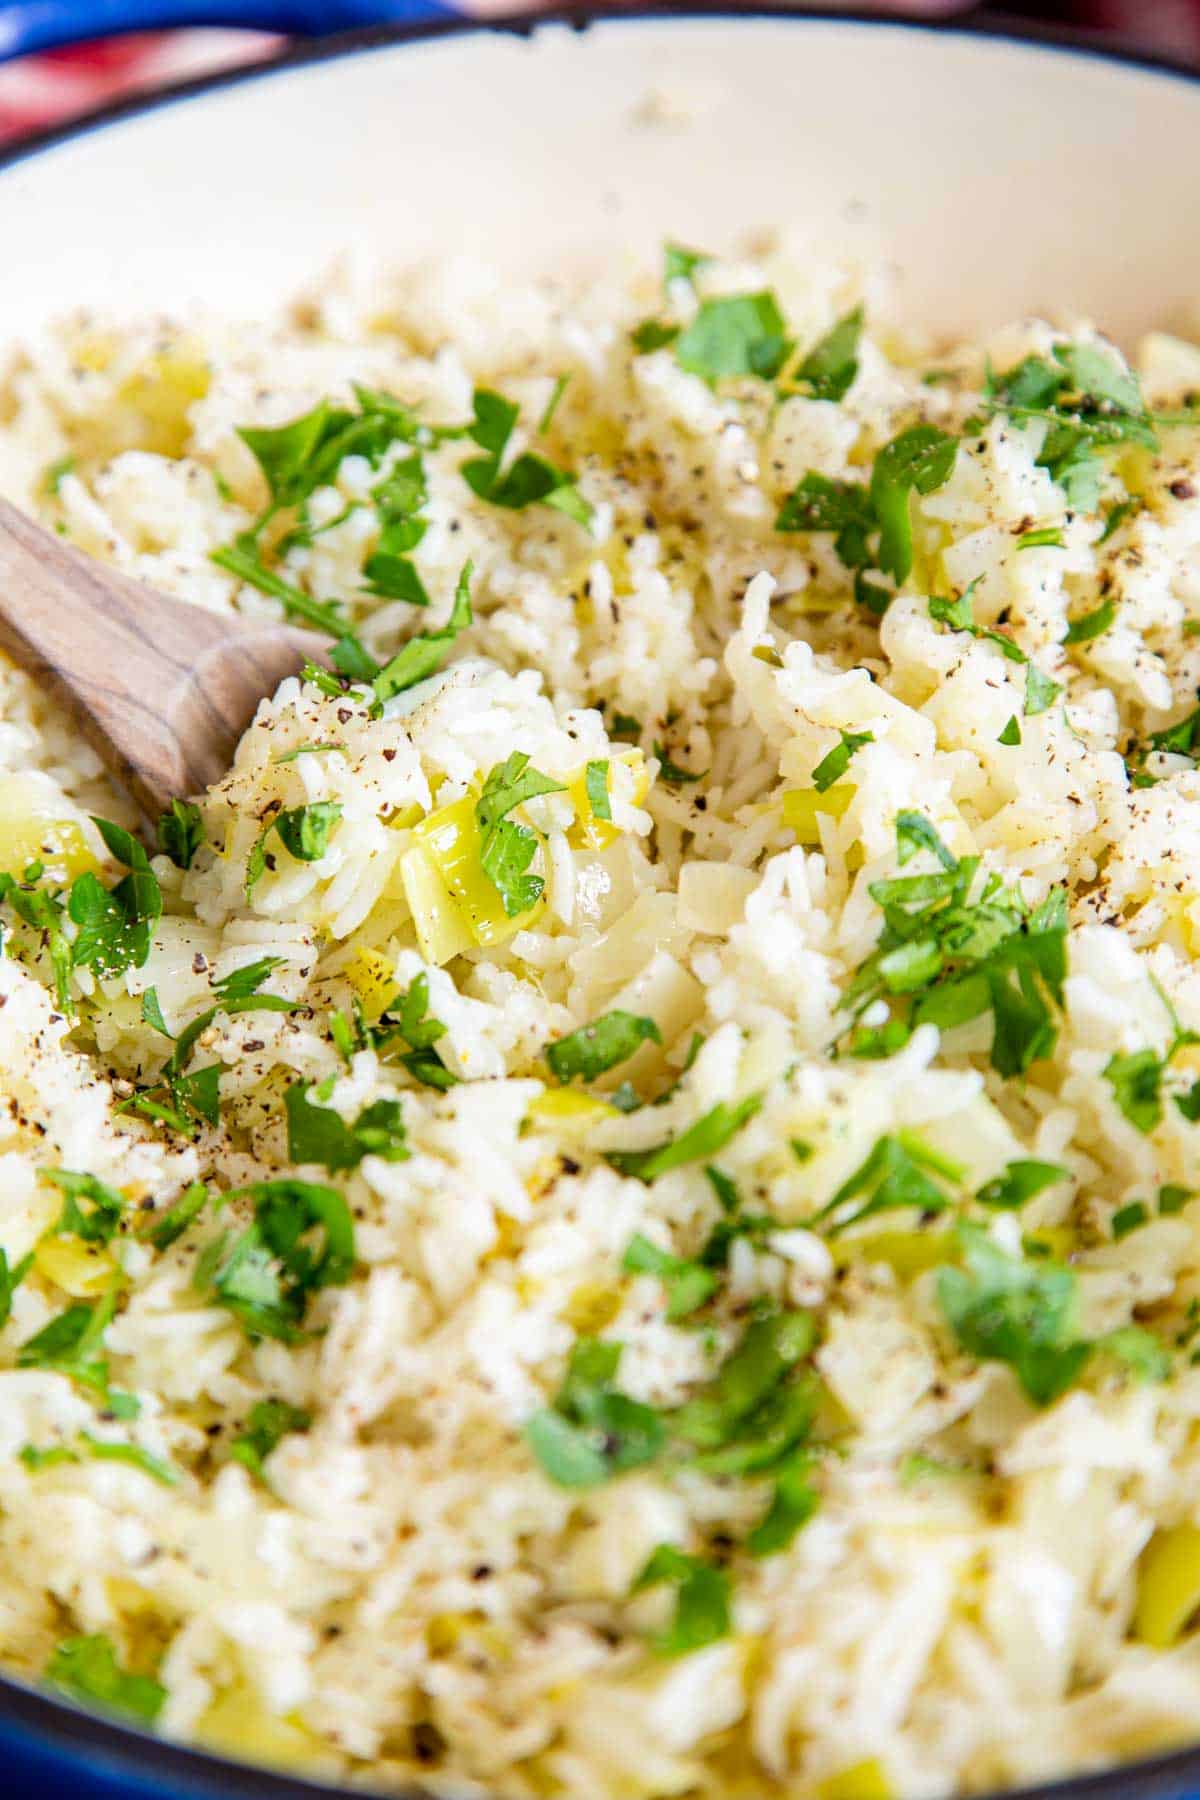 Serving up light, fluffy, leek rice pilaf, garnished with chopped parsley